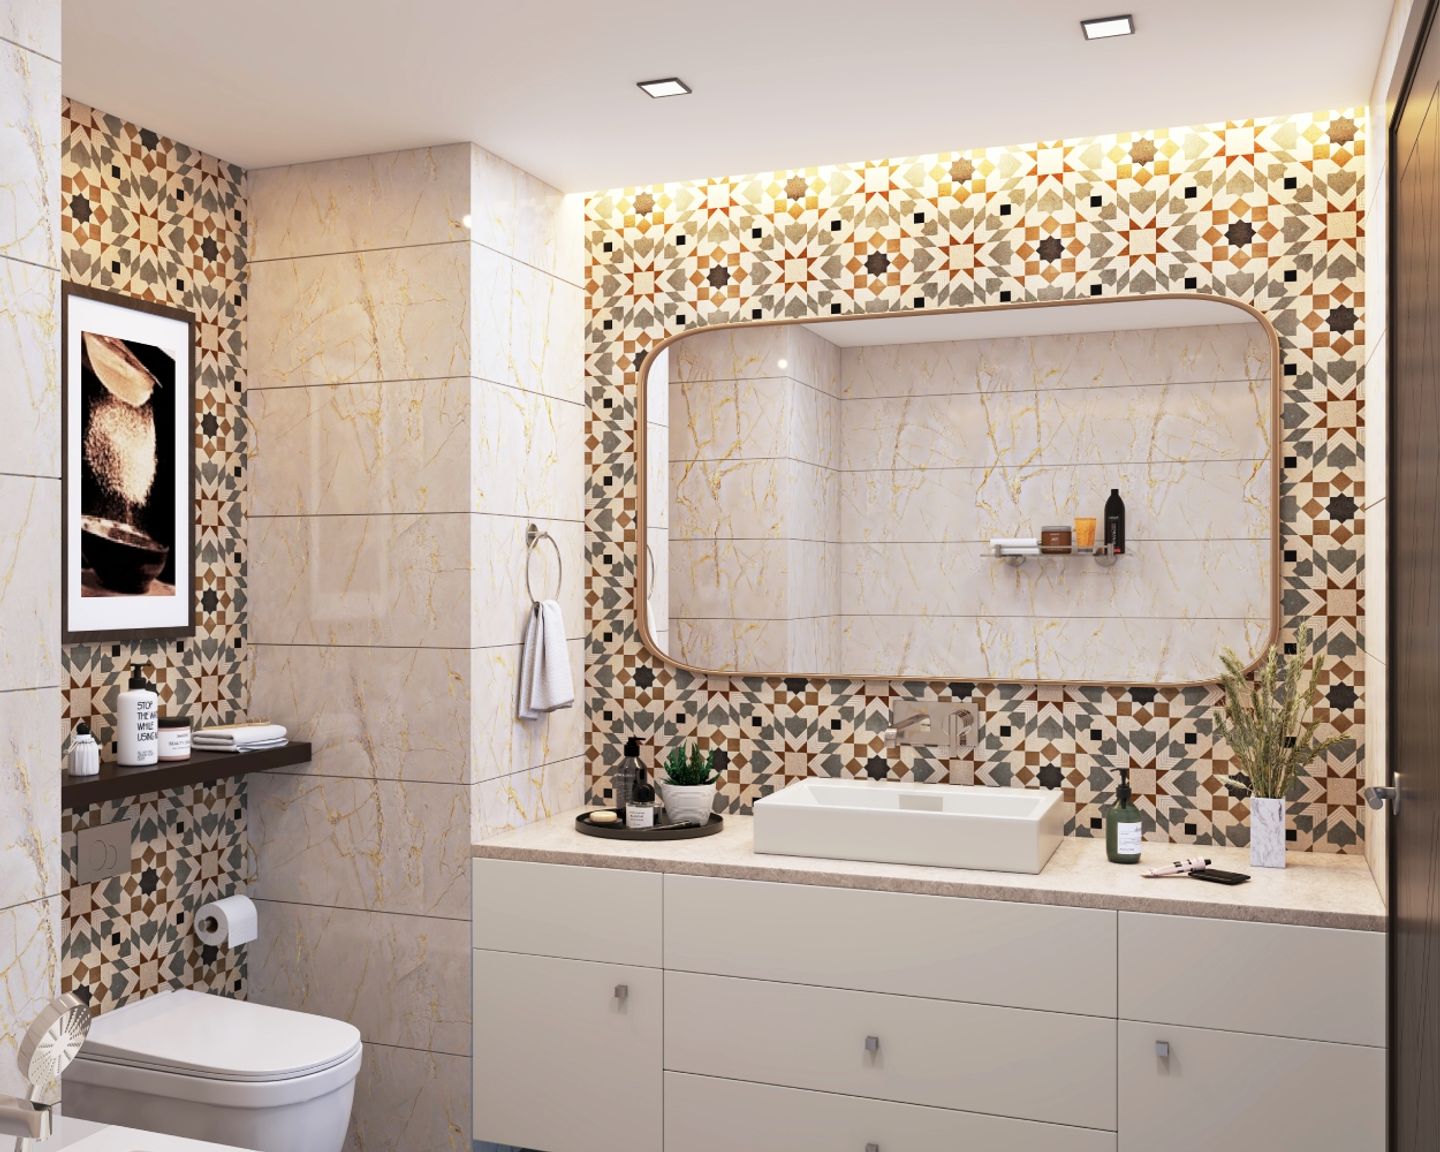 Semi-Glossy Multicoloured Mosaid Bathroom Tiles With White Vanity Unit - Livspace